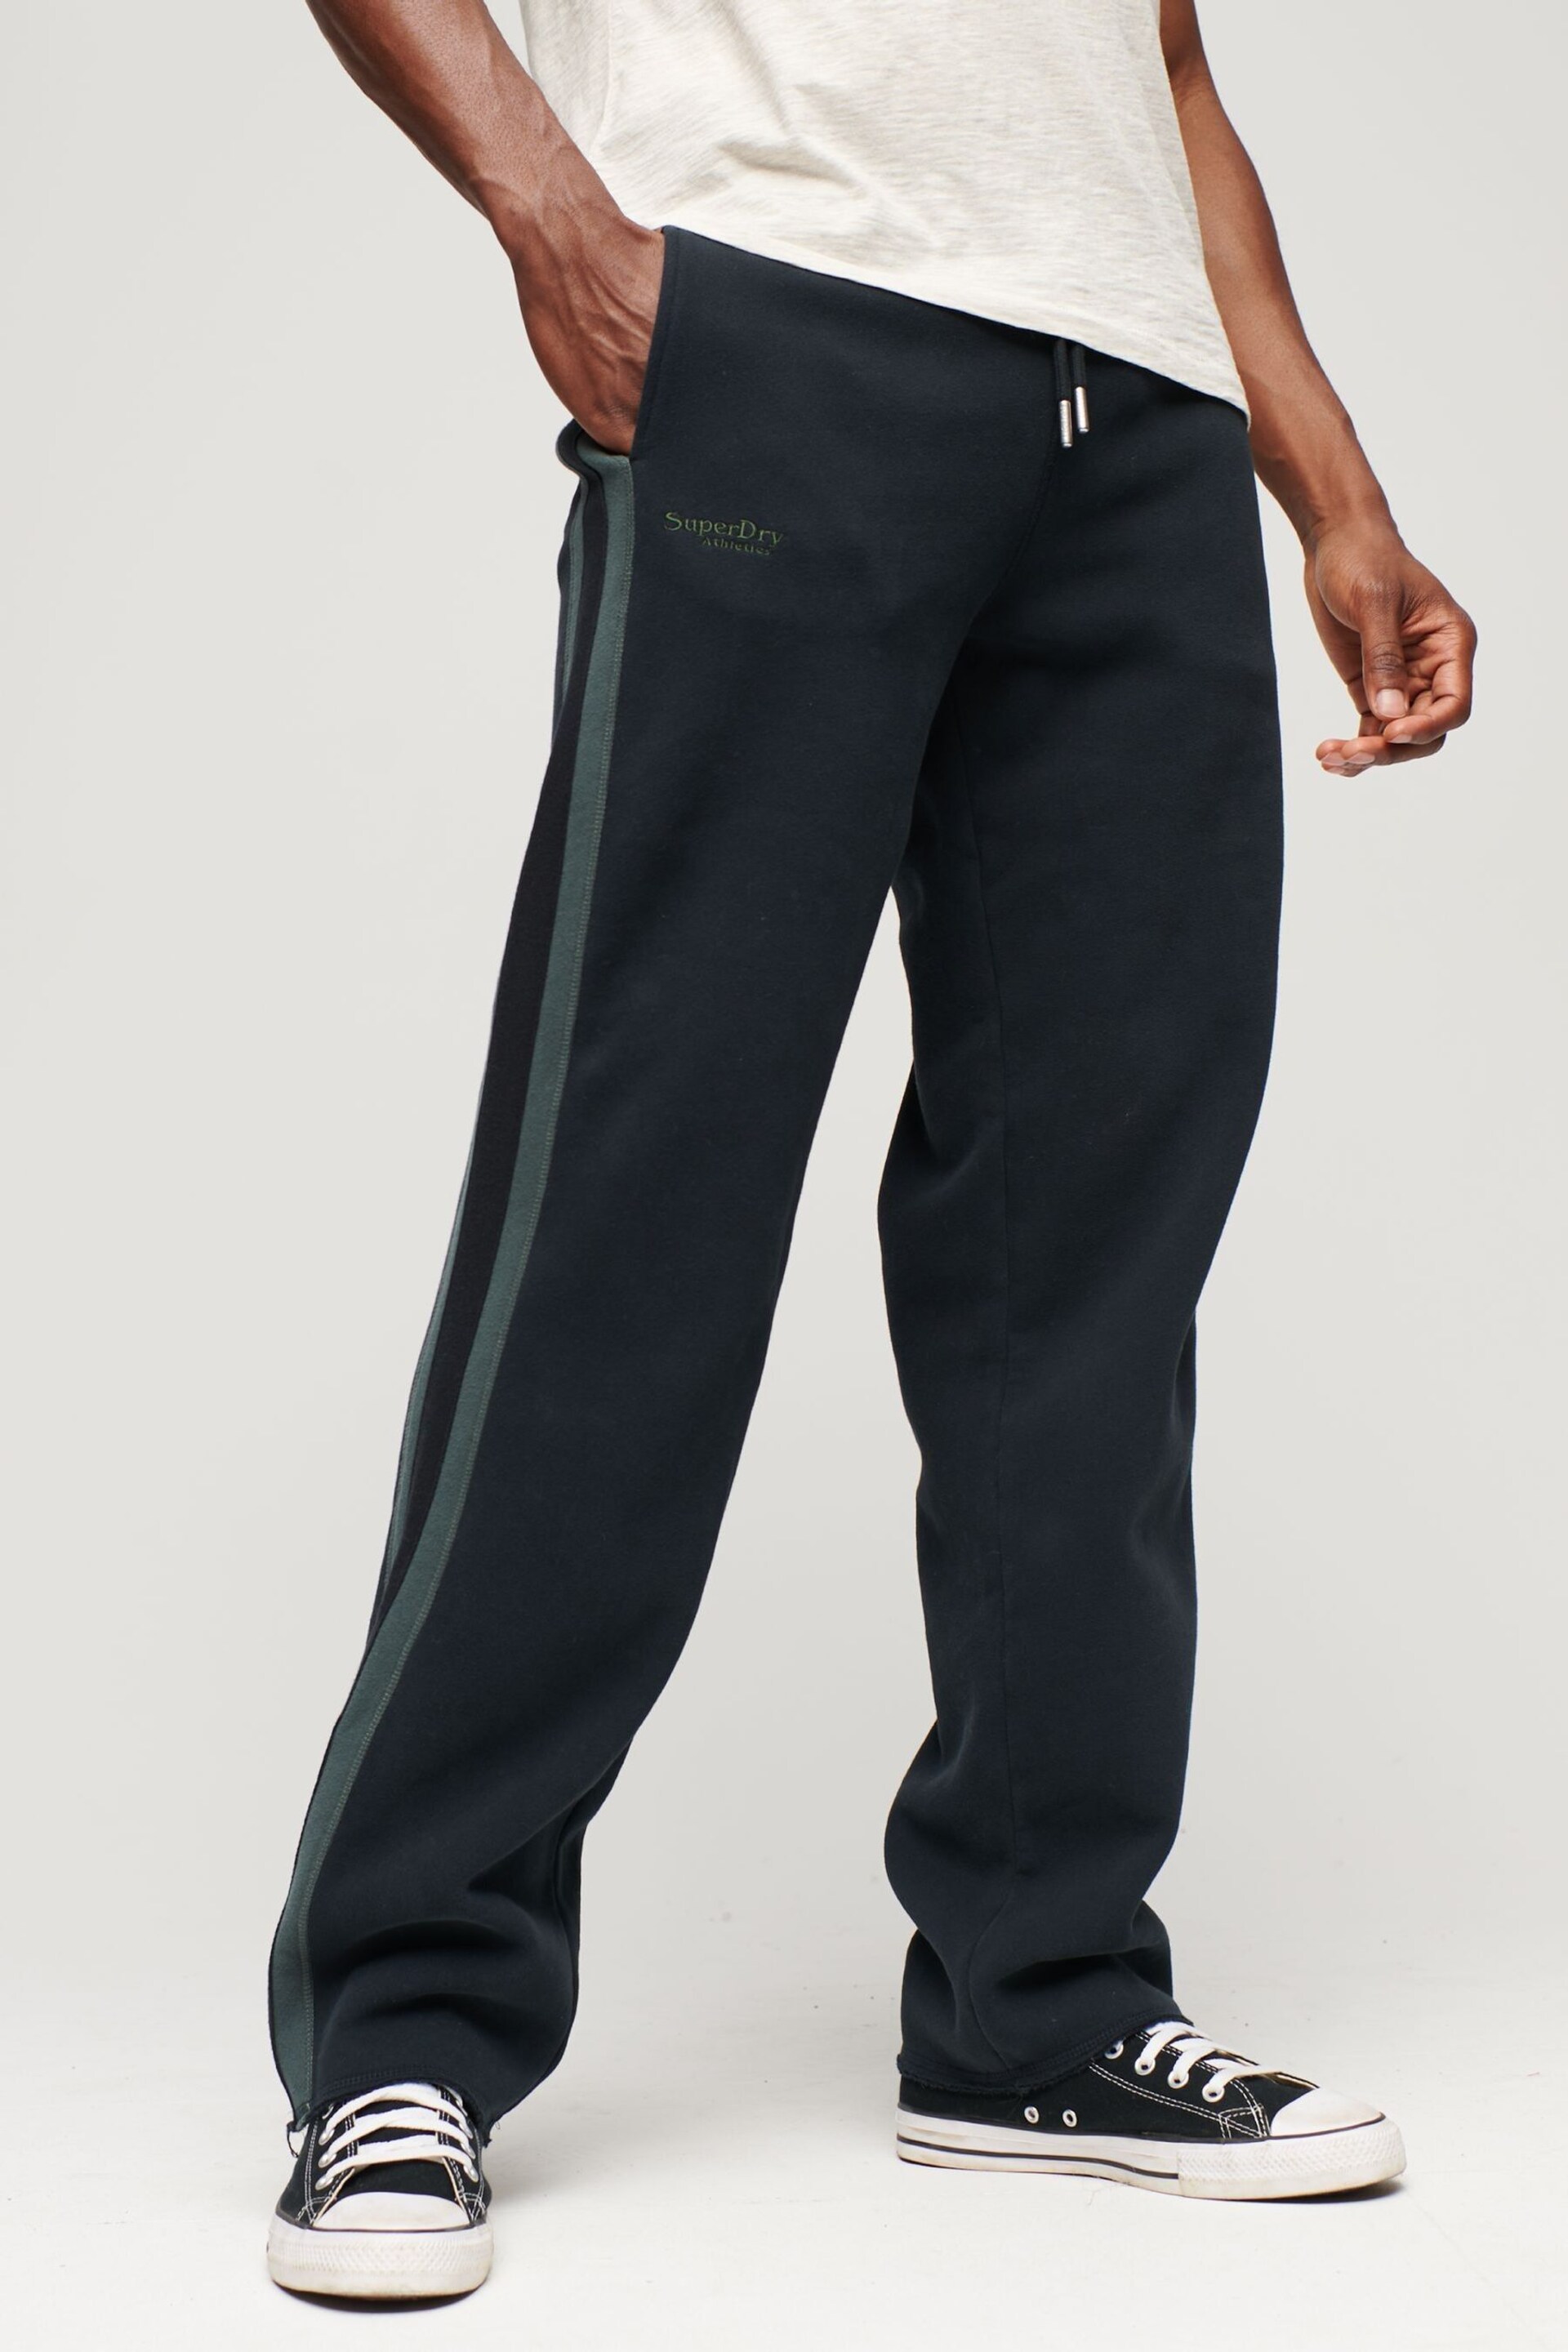 Superdry Black Essential Straight Joggers - Image 1 of 6